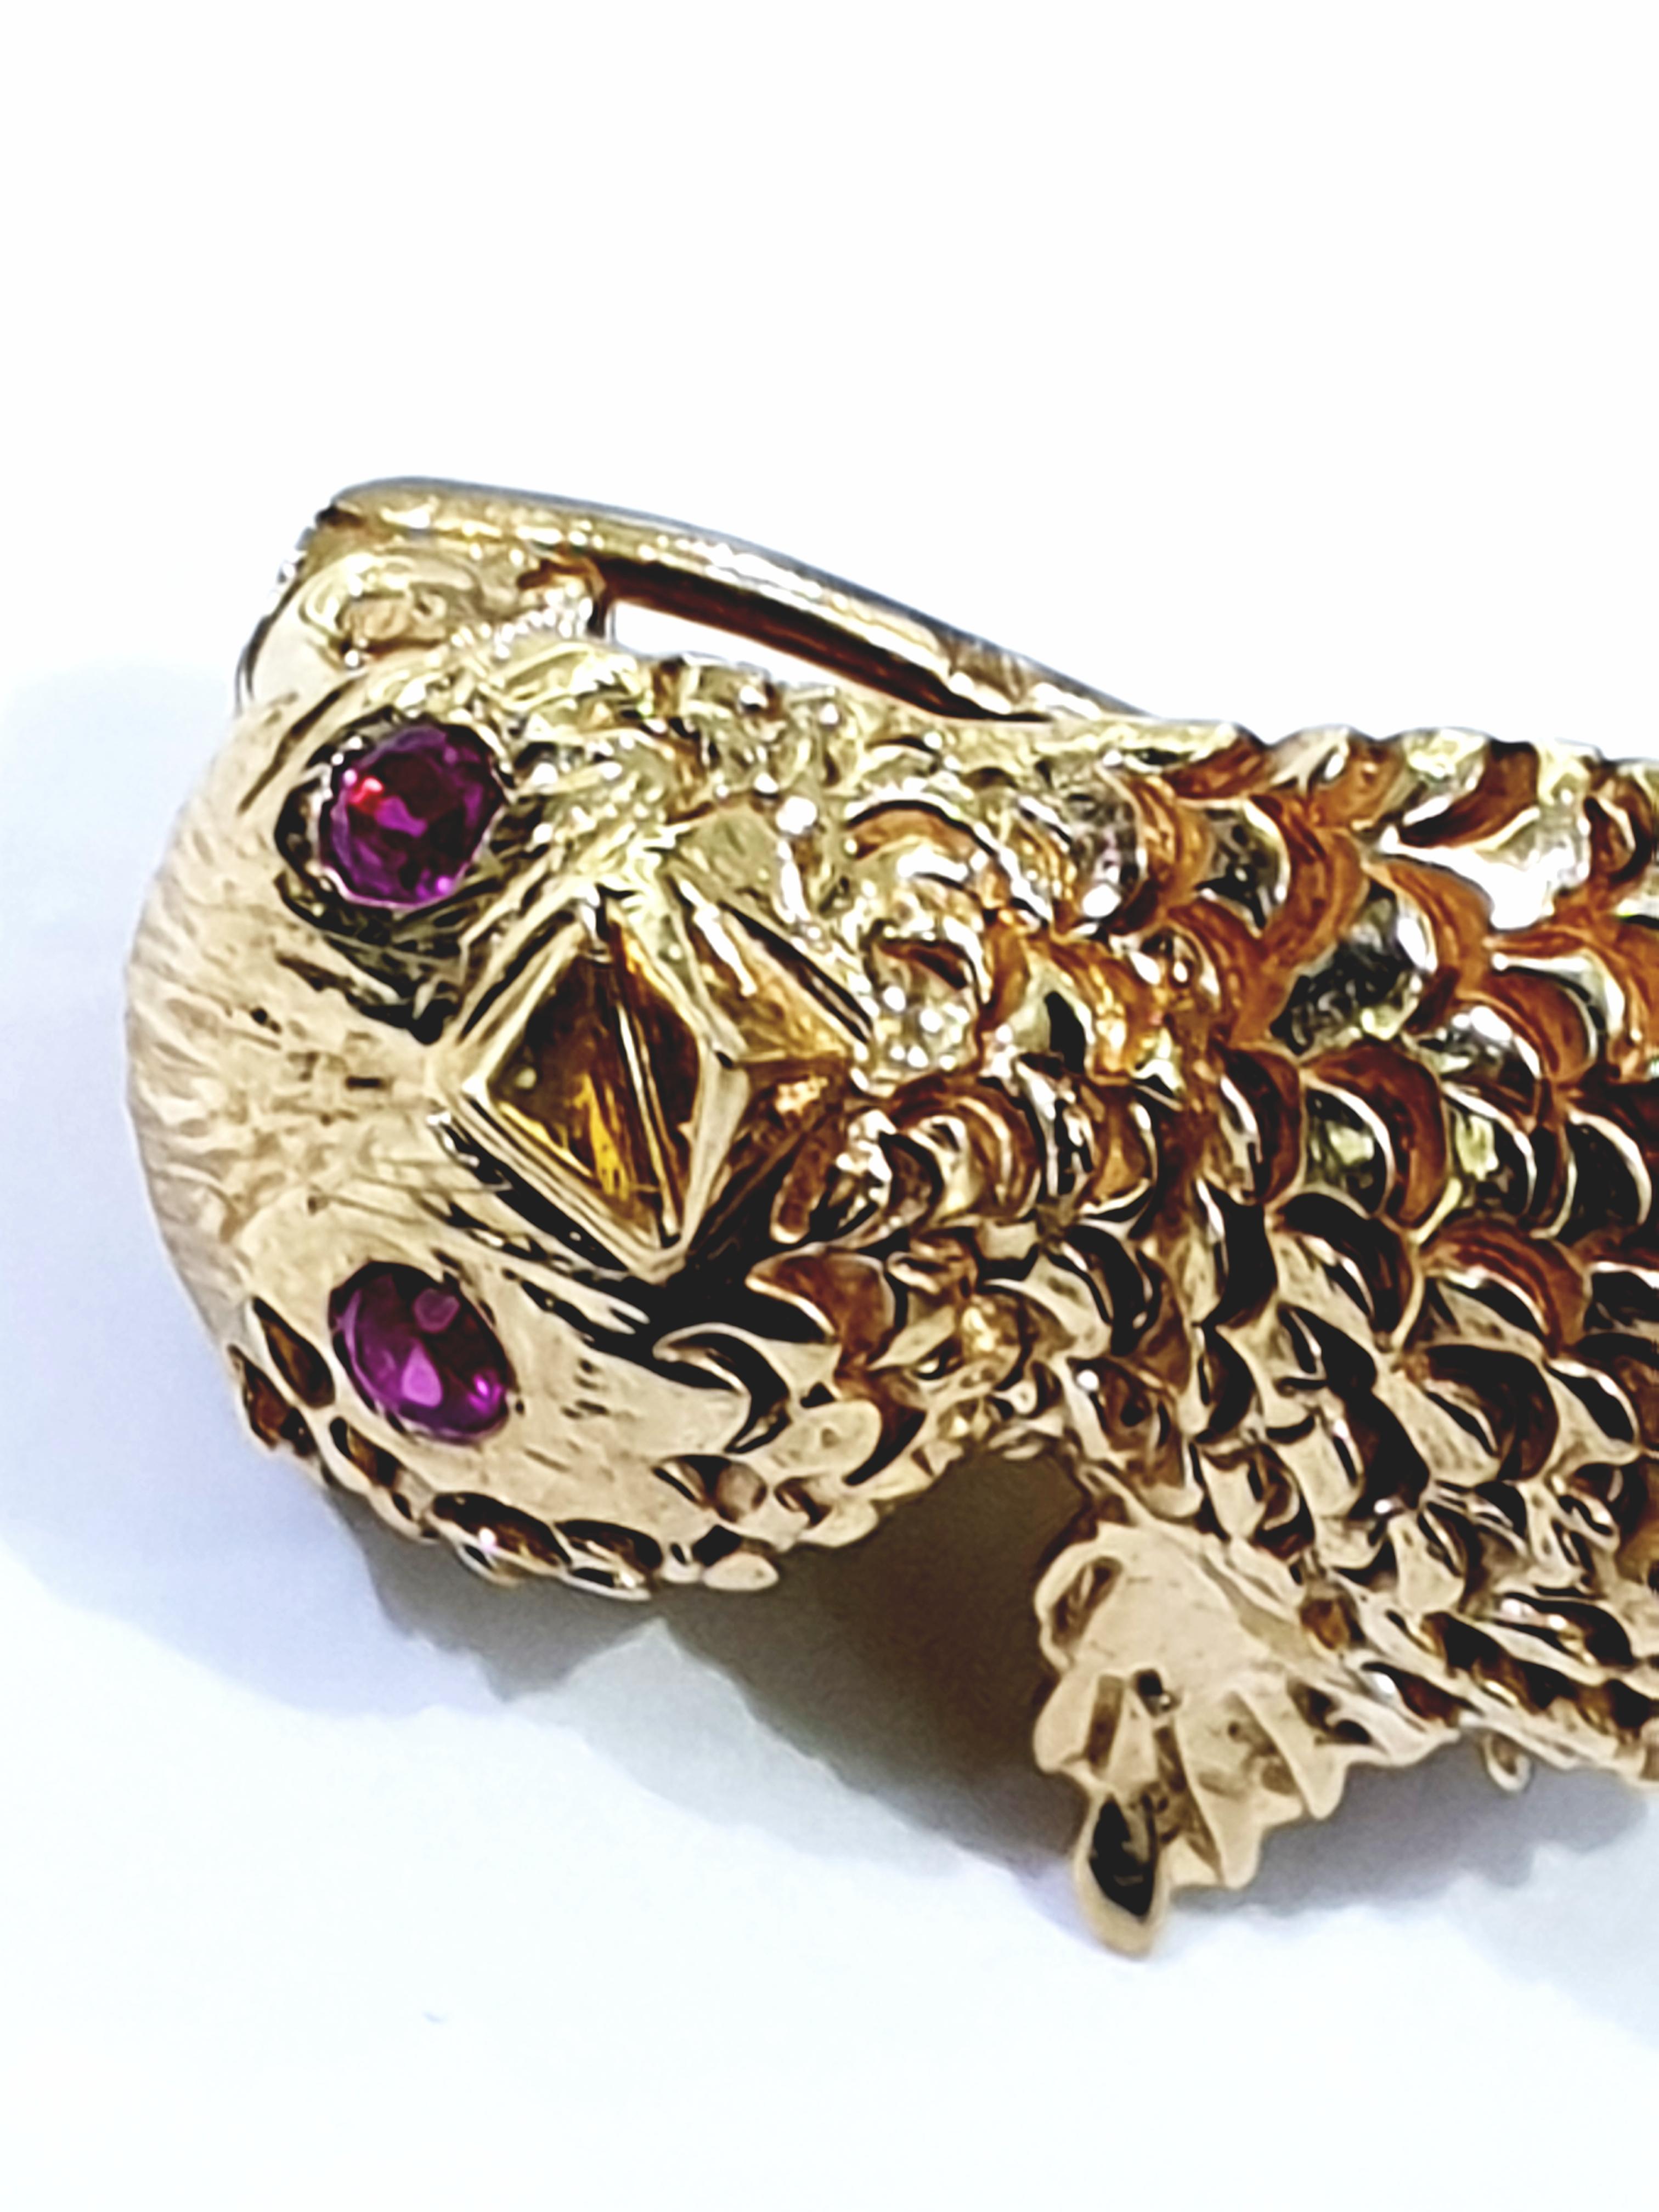 Offering a vintage 18 karat yellow gold Boucheron  bird  brooch. The brooch has lovely details  with the two ruby eyes. It is signed stamped by the maker. (see photos).French origin hallmark presented.
Length: 3 cm  Weight: 6.6 gr